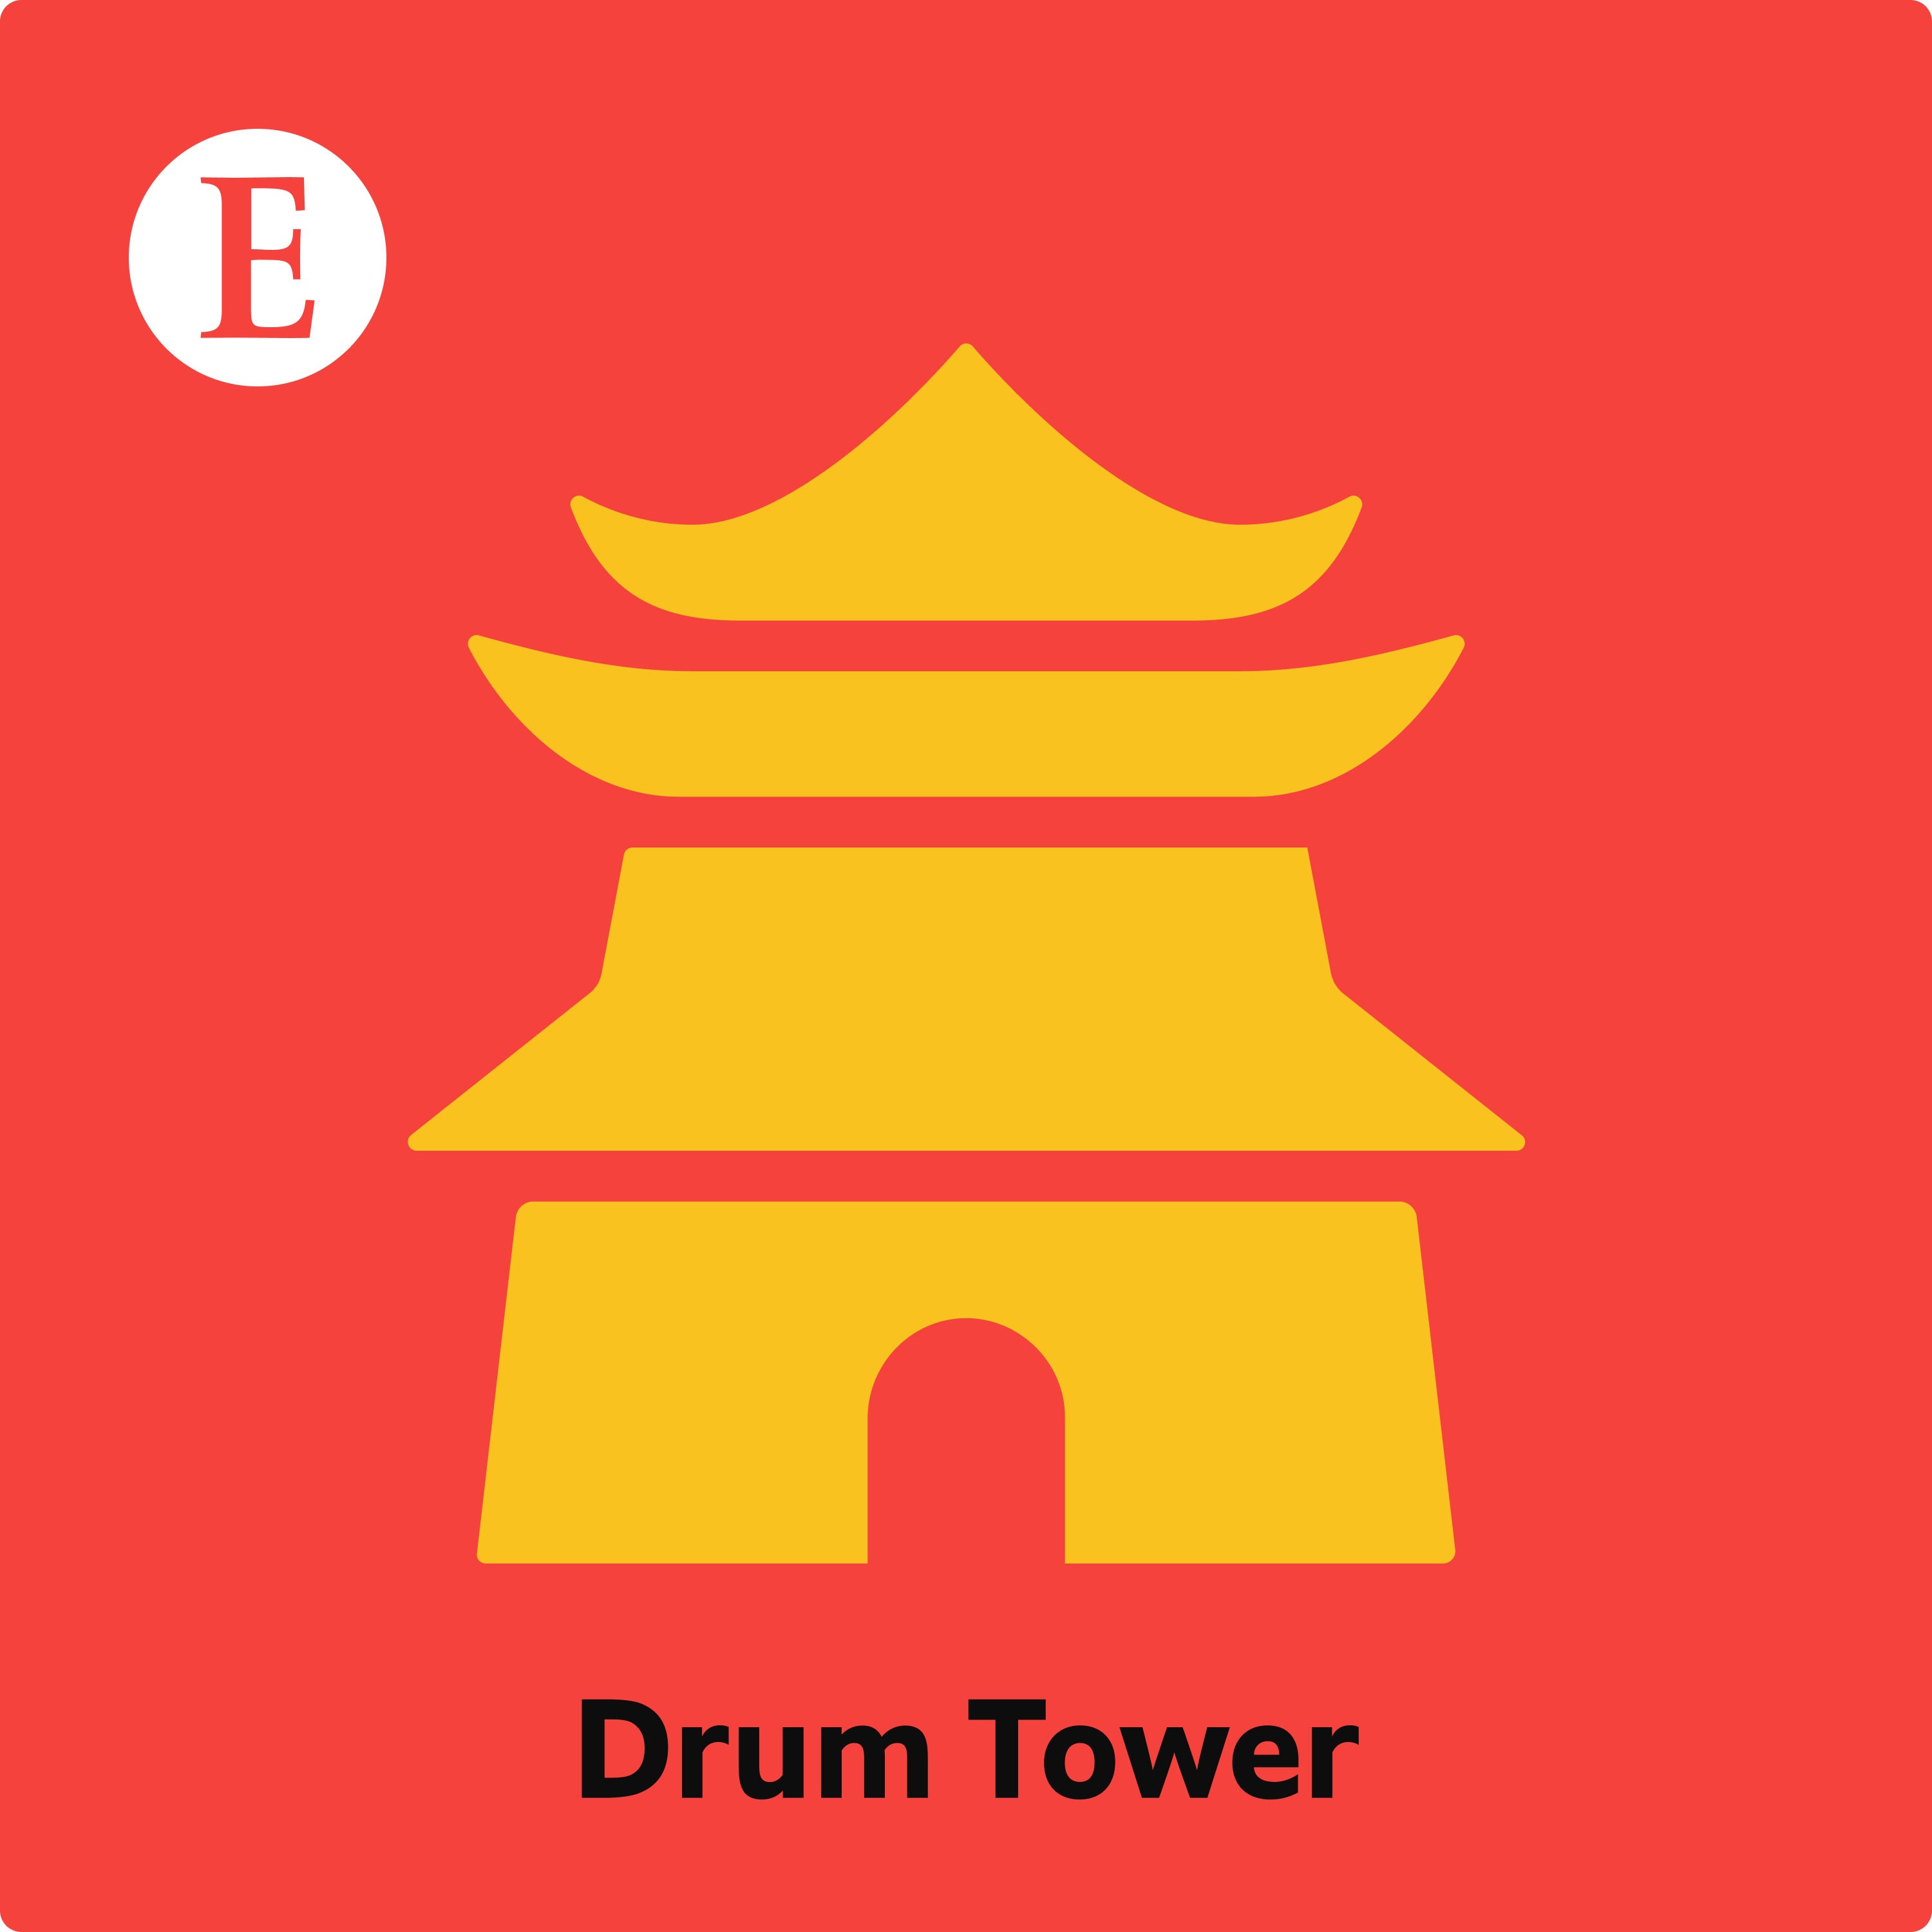 Drum Tower: China’s LGBT crackdown